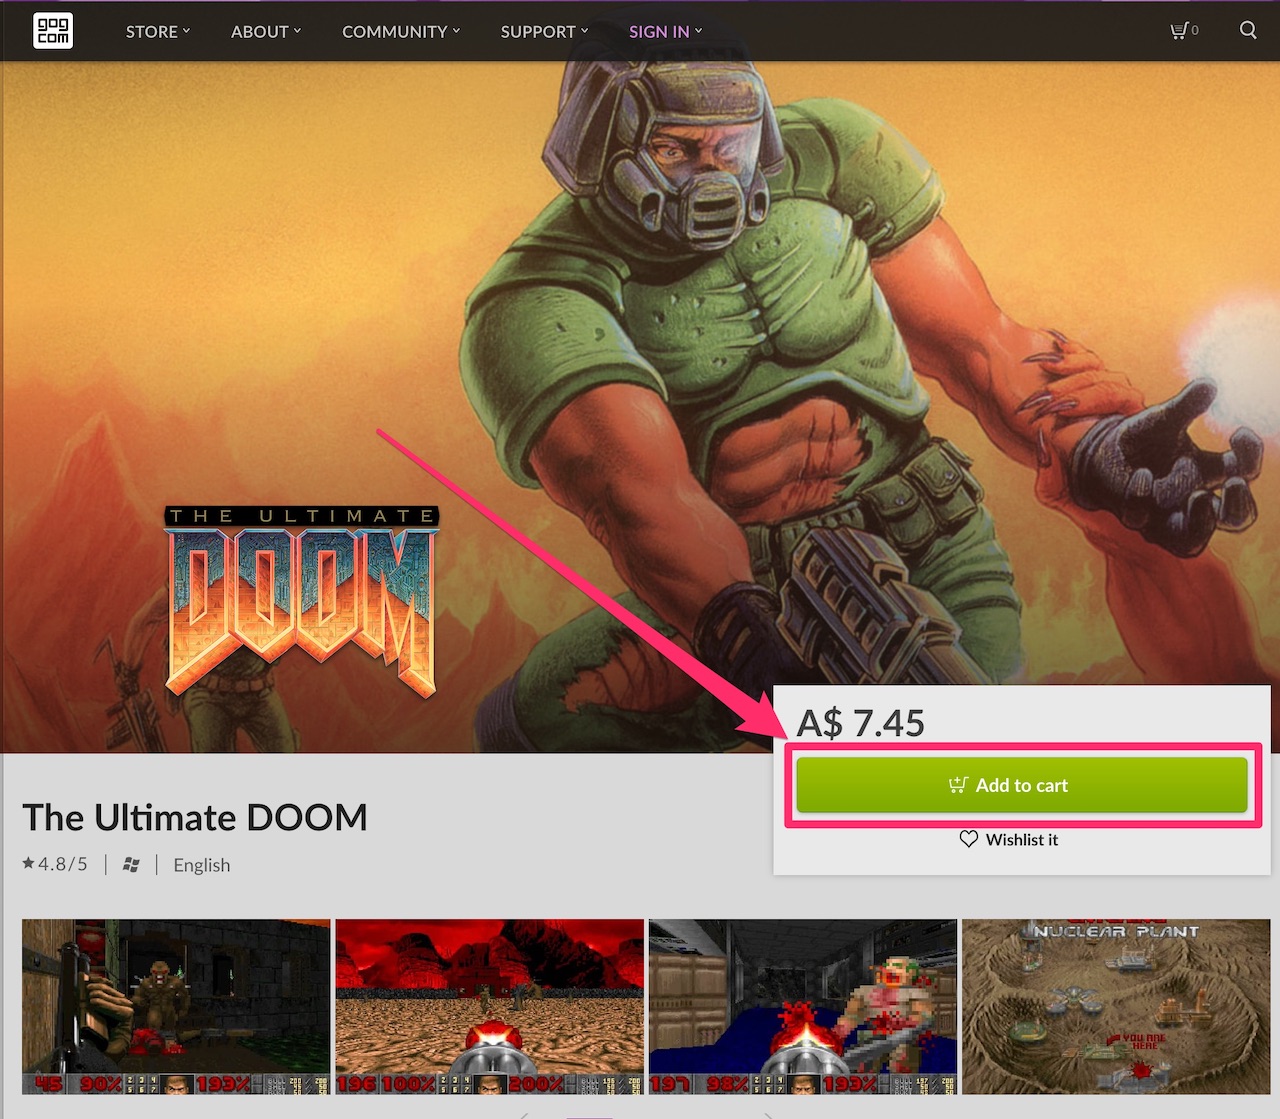 GOG.com The Ultimate Doom purchase page